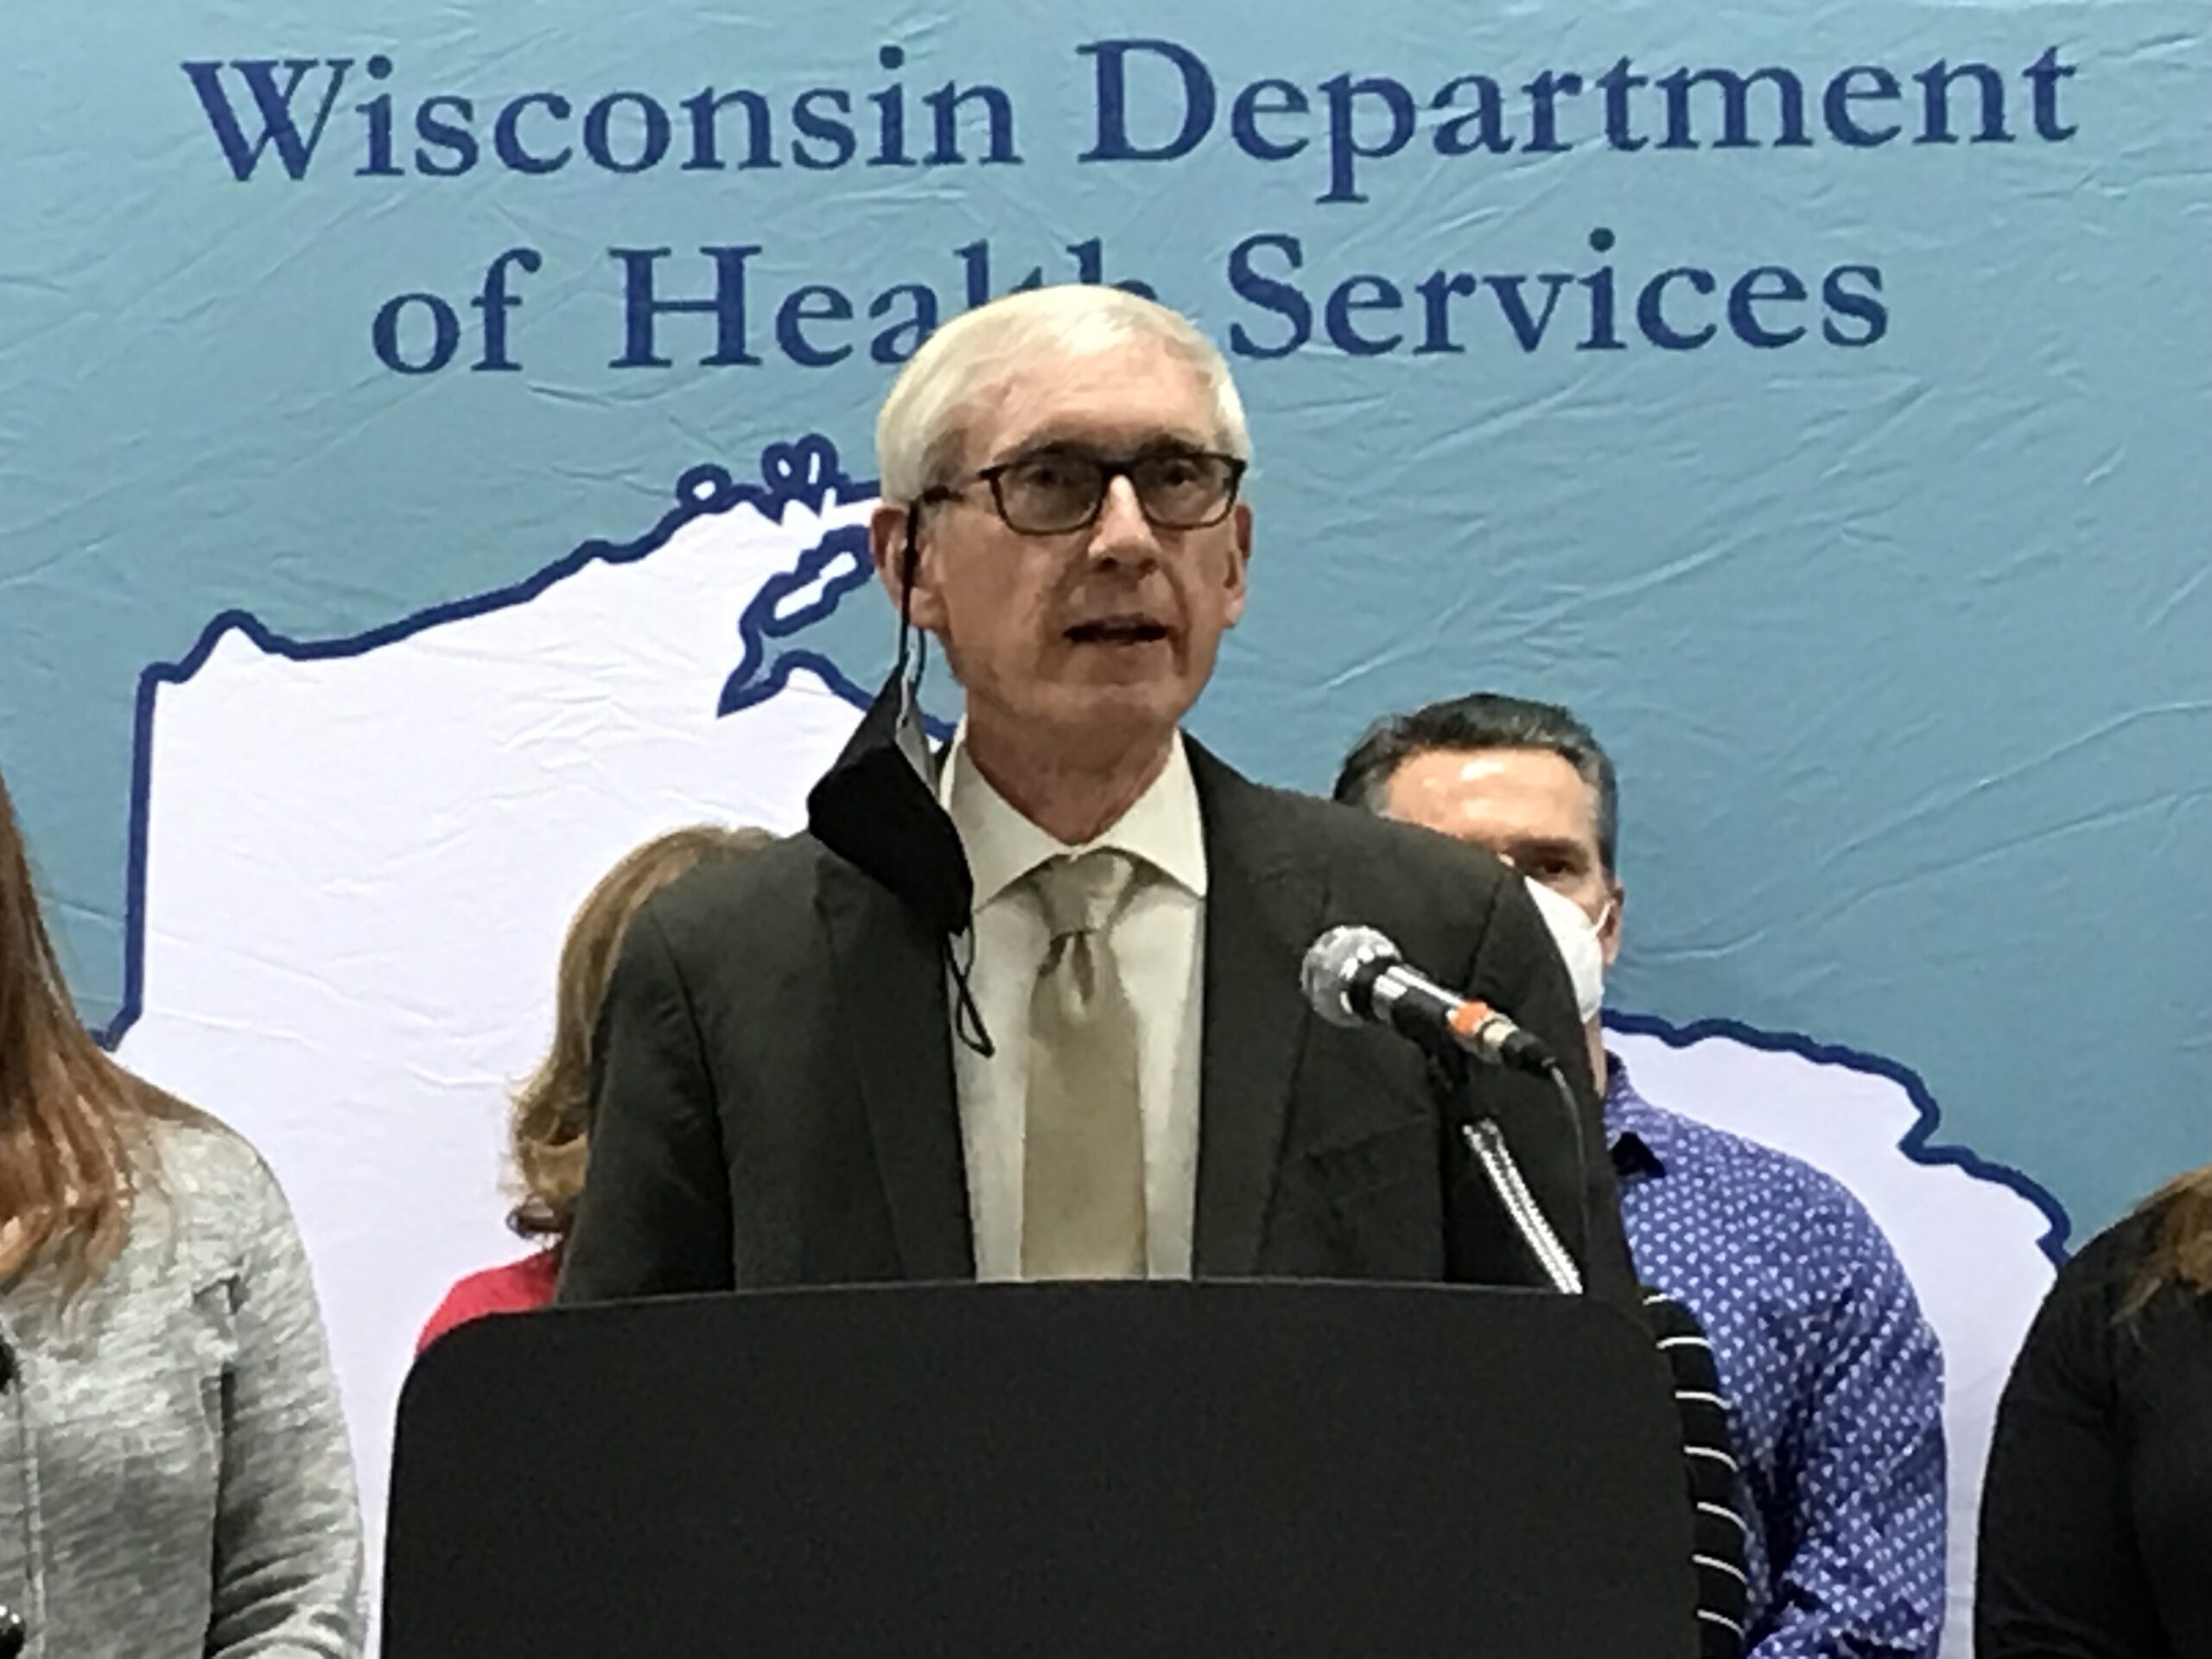 As pandemic wanes, Evers thanks essential workers, health staff, National Guard